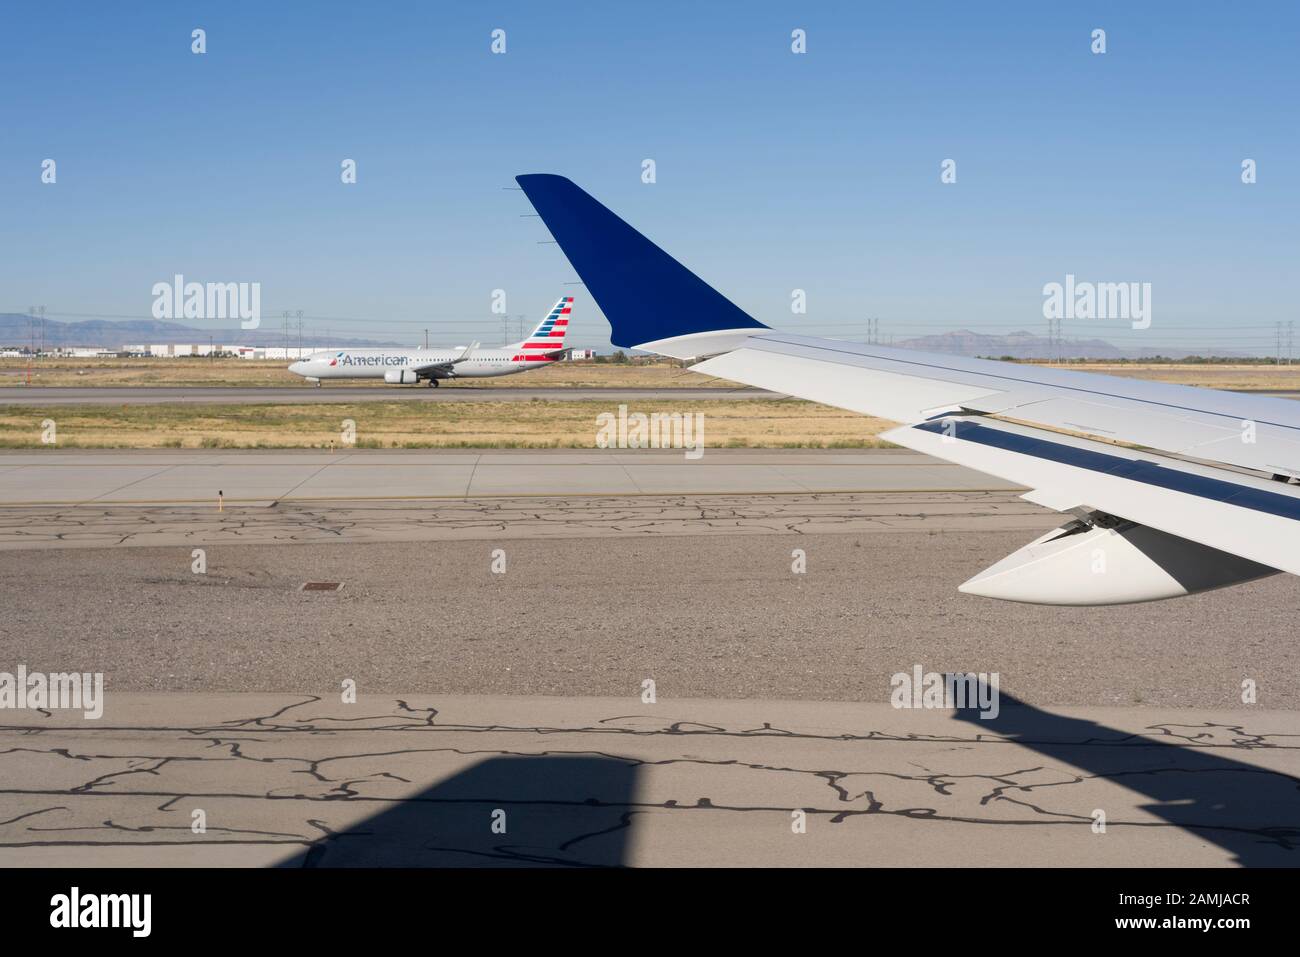 Delta Airlines on runway ready to take off at The Salt Lake City International Airport as seen from an airplane window seat. Stock Photo